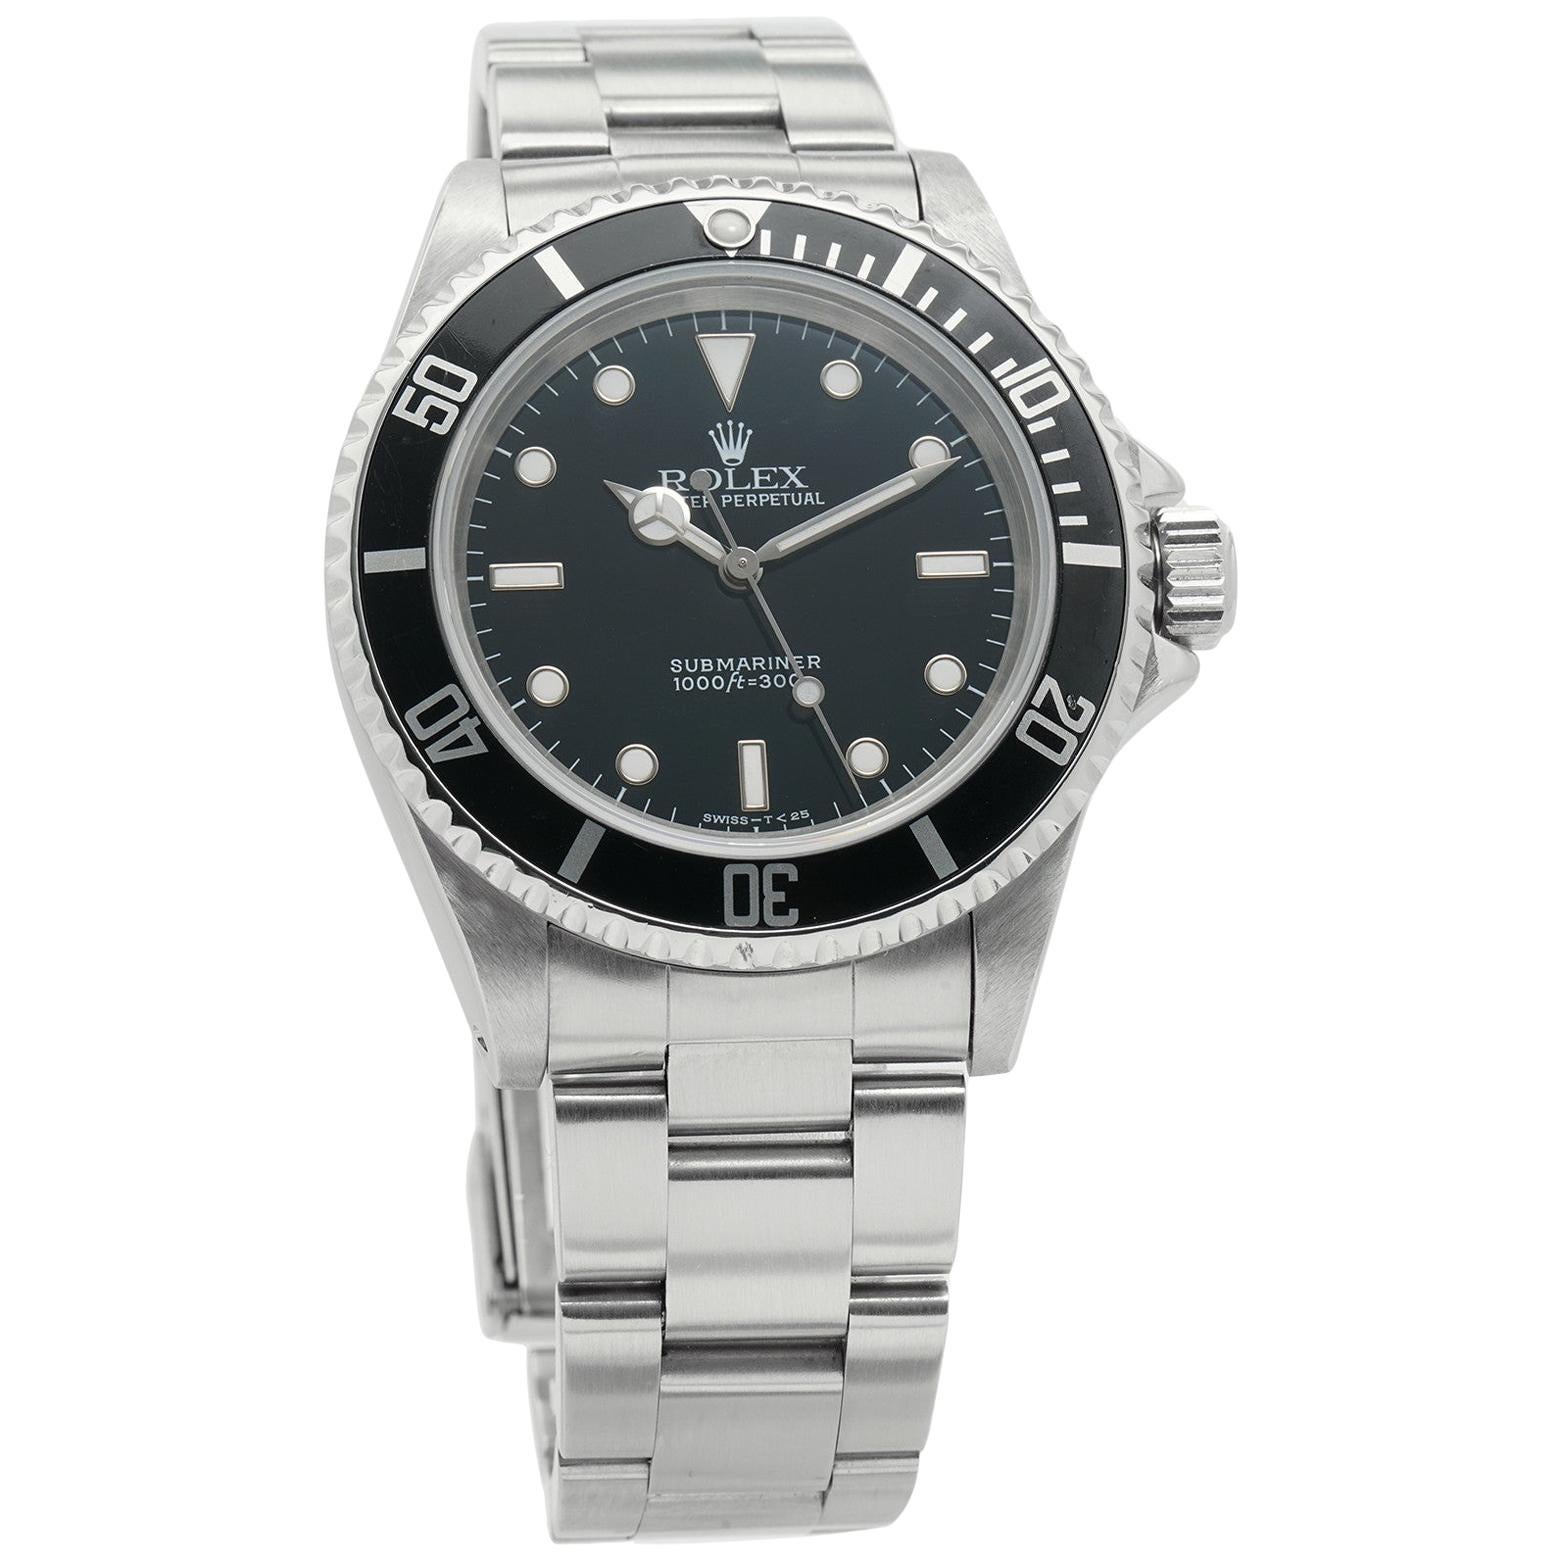 Rolex Submariner 14060, Missing Dial, Certified and Warranty For Sale